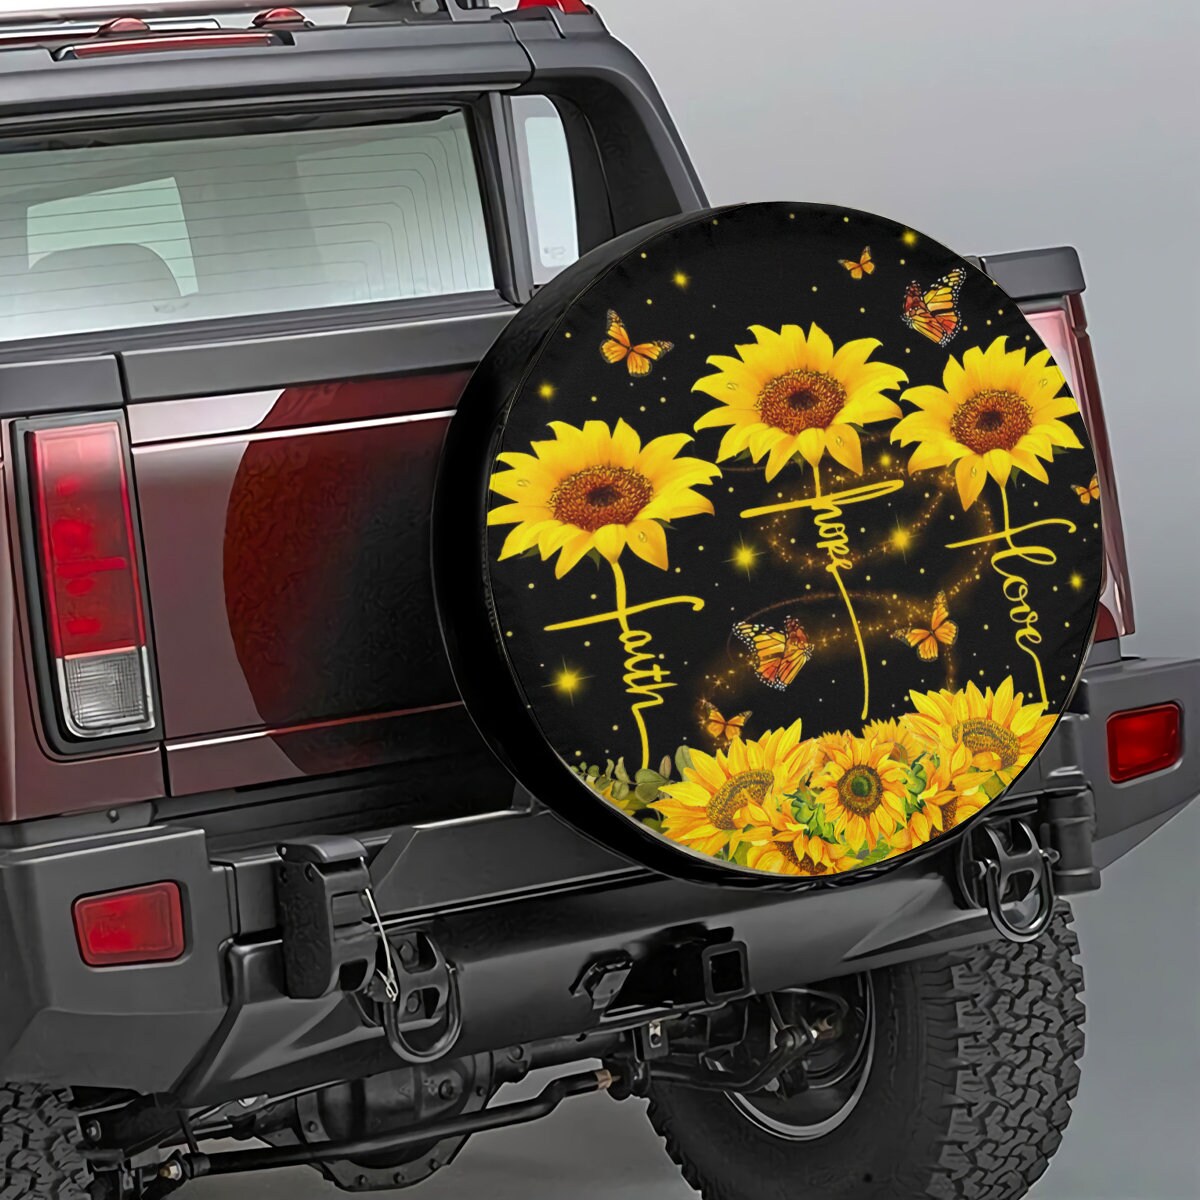 Sunflower Spare Tire Cover, Sunflower Butterfly Wheel Cover, Faith Hope  Love Tire Cover